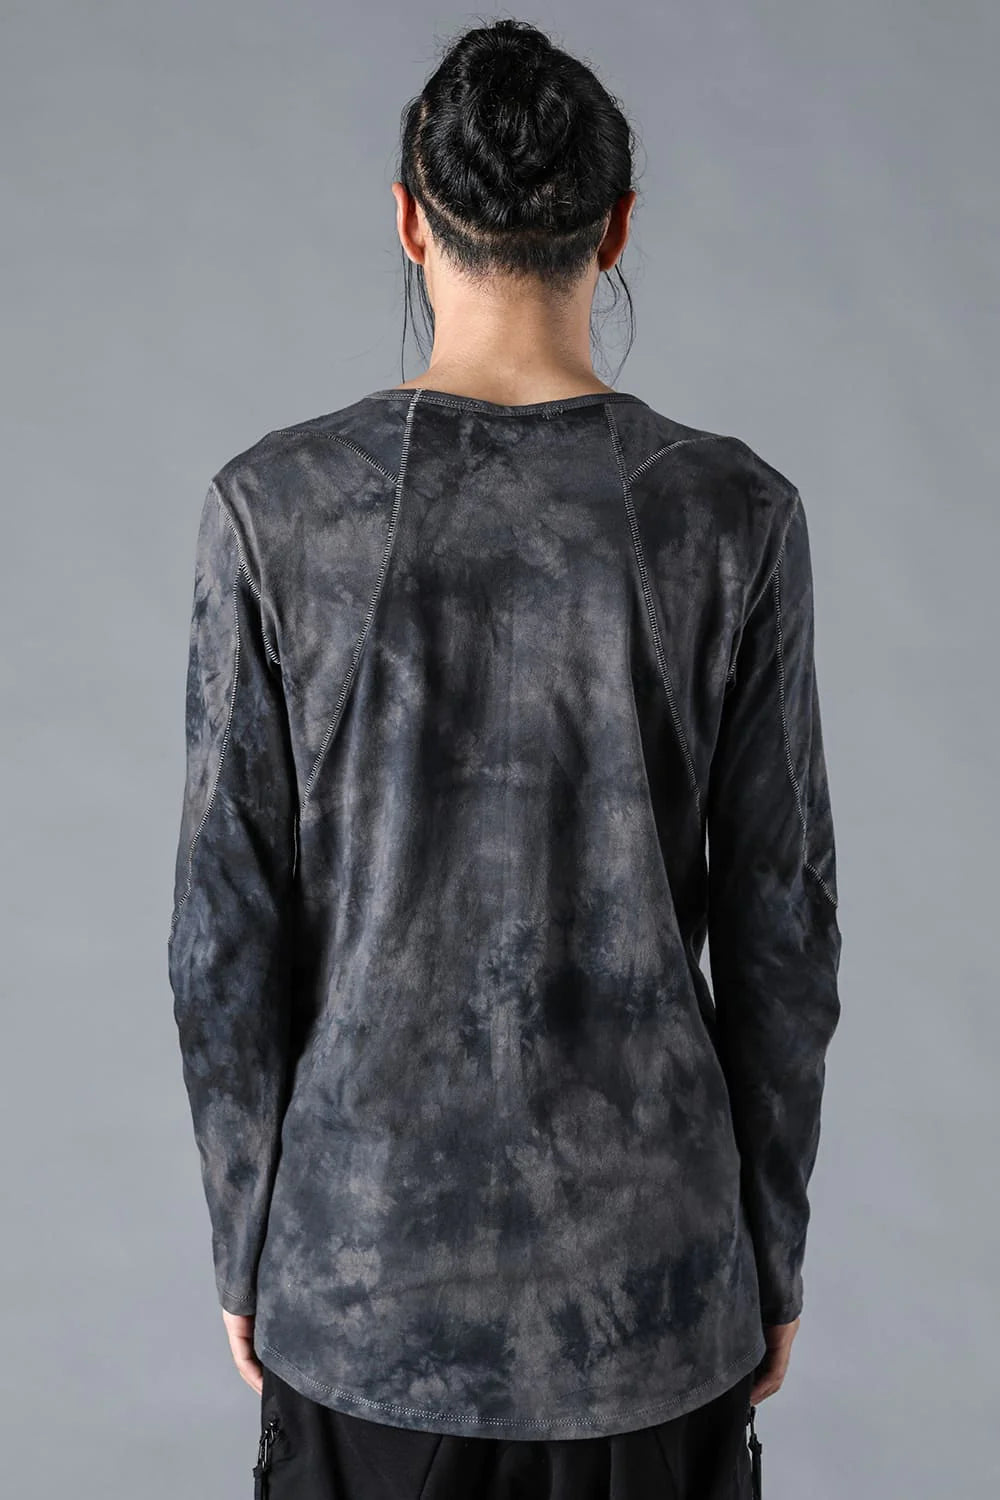 Clay Blue Uneven Dyed Soft Cotton Jersey Long Sleeve T-Shirt